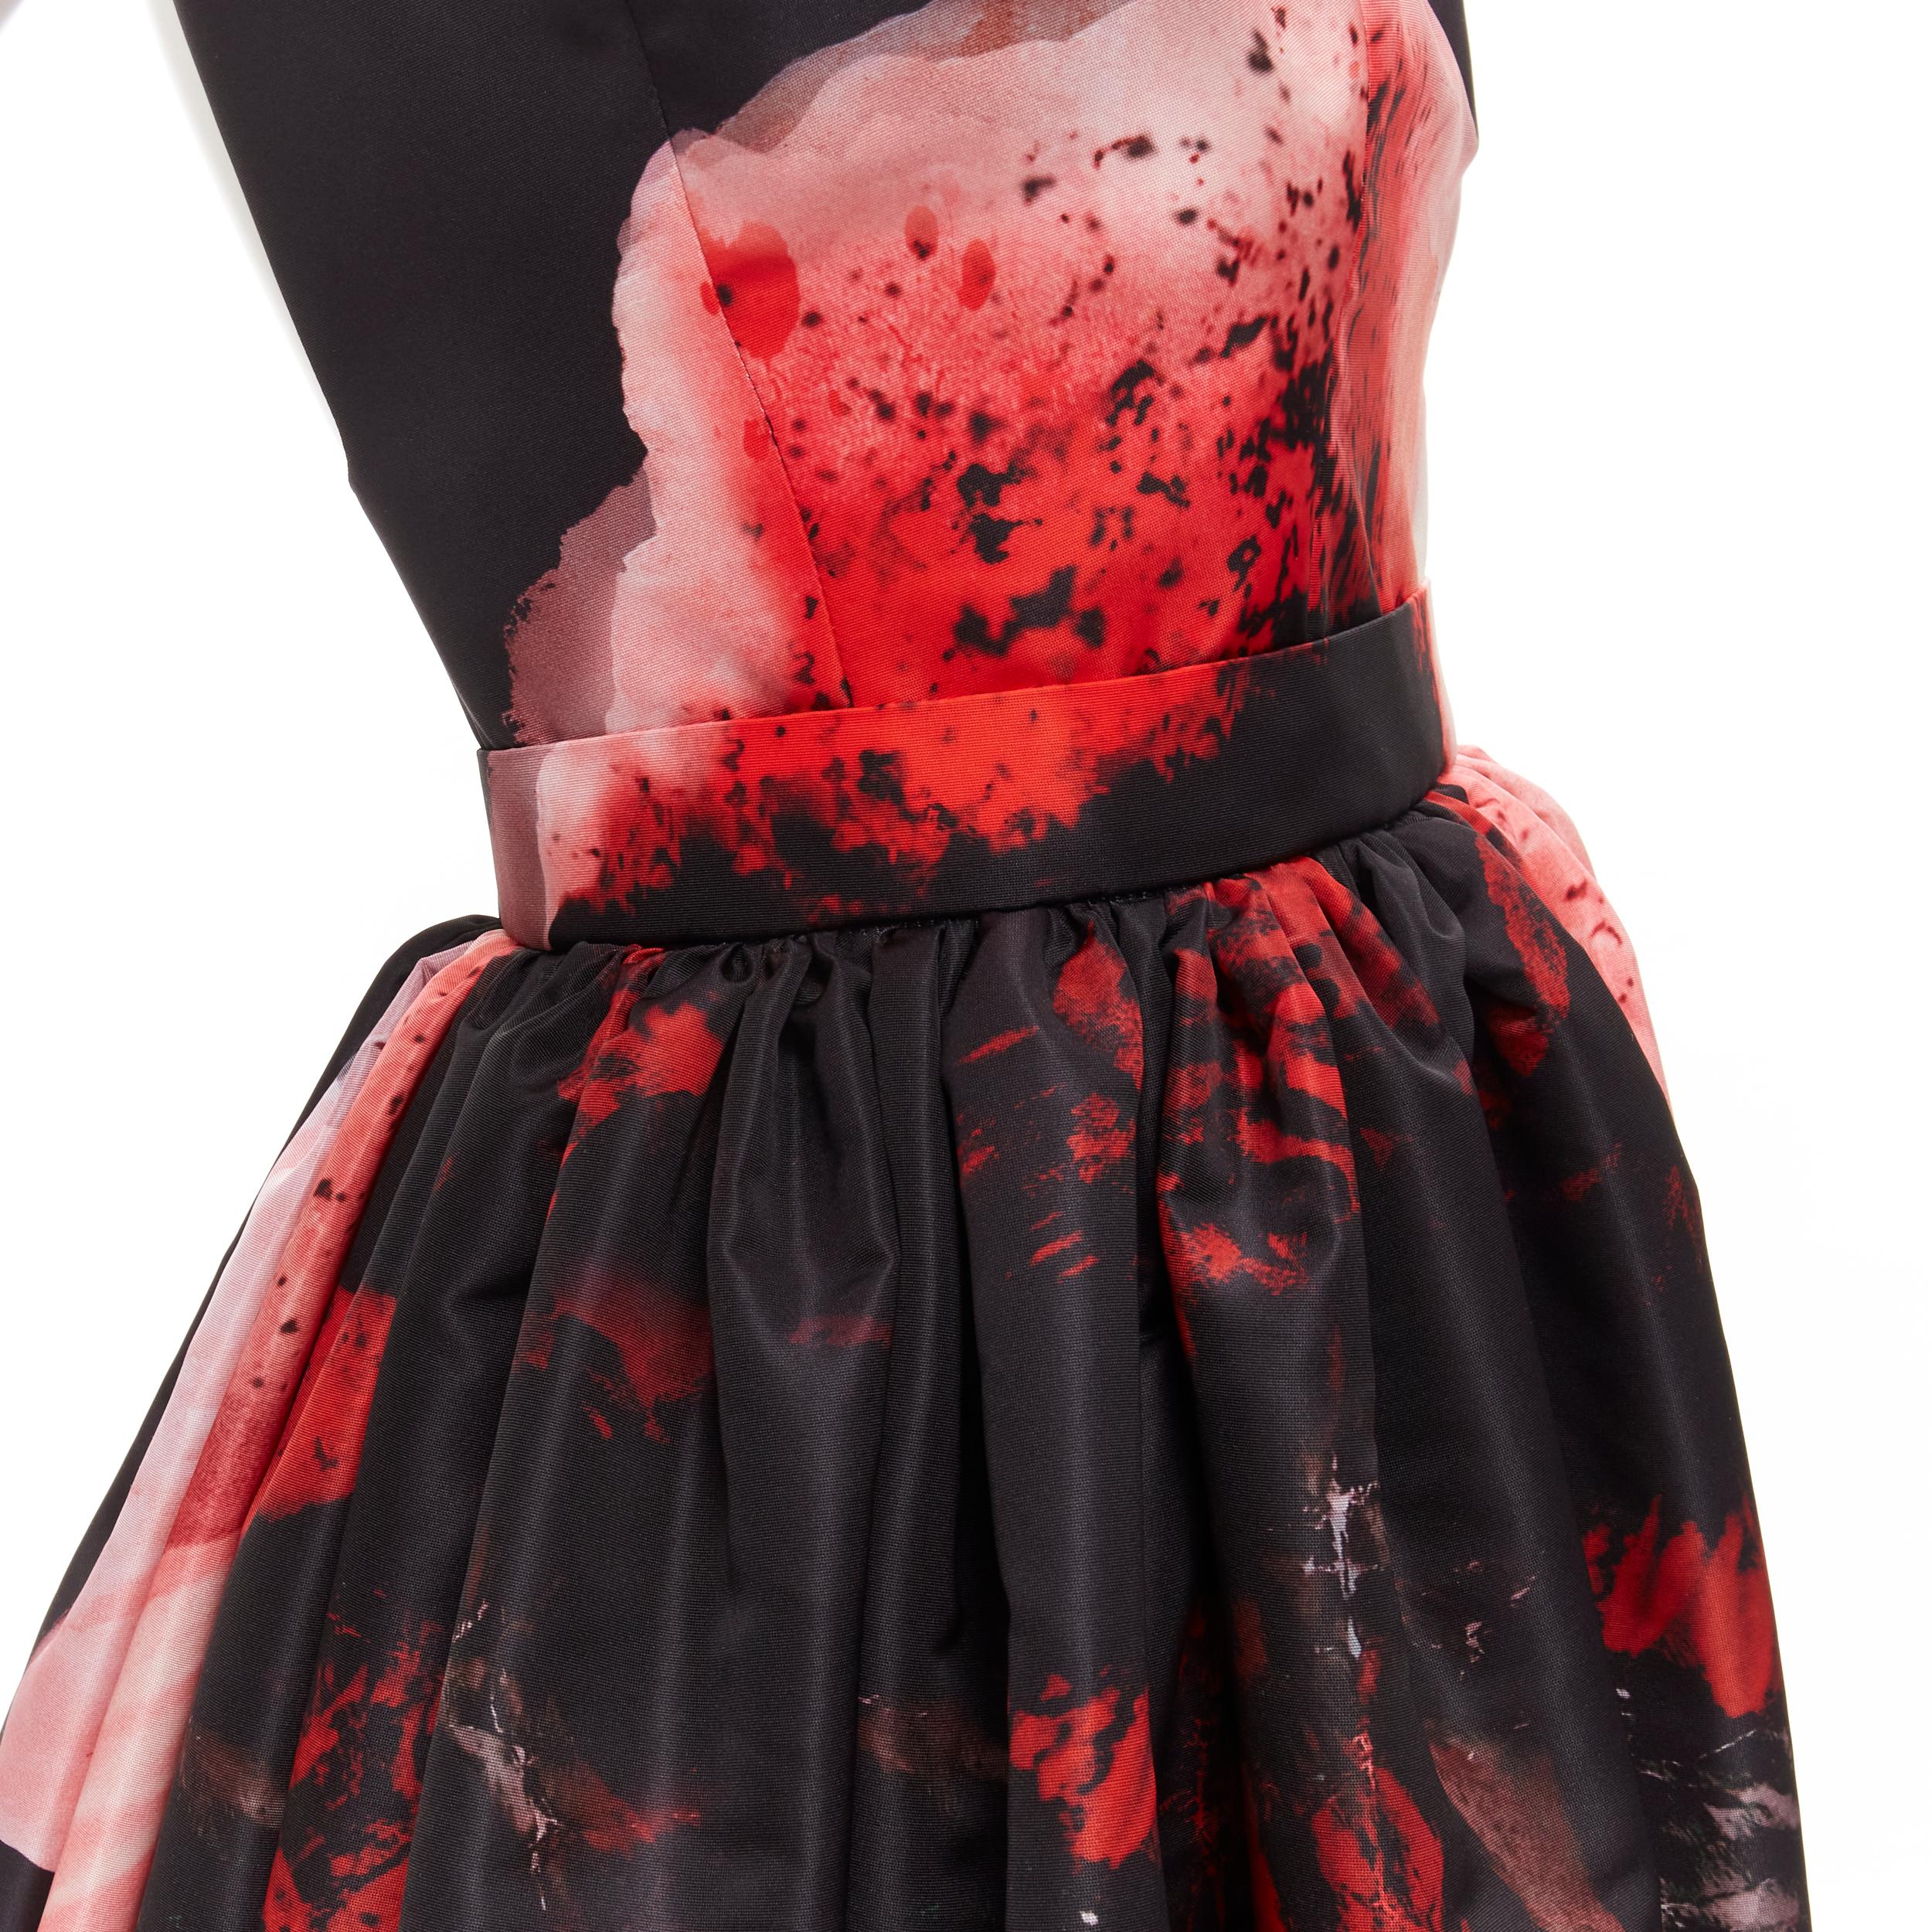 new ALEXANDER MCQUEEN 2021 Runway Anemone black red floral full gown IT38 S
Brand: Alexander McQueen
Collection: Fall Winter 2021 Runway
Material: Polyester
Color: Black
Pattern: Floral
Closure: Zip
Extra Detail: Signature 2021 Anemones floral